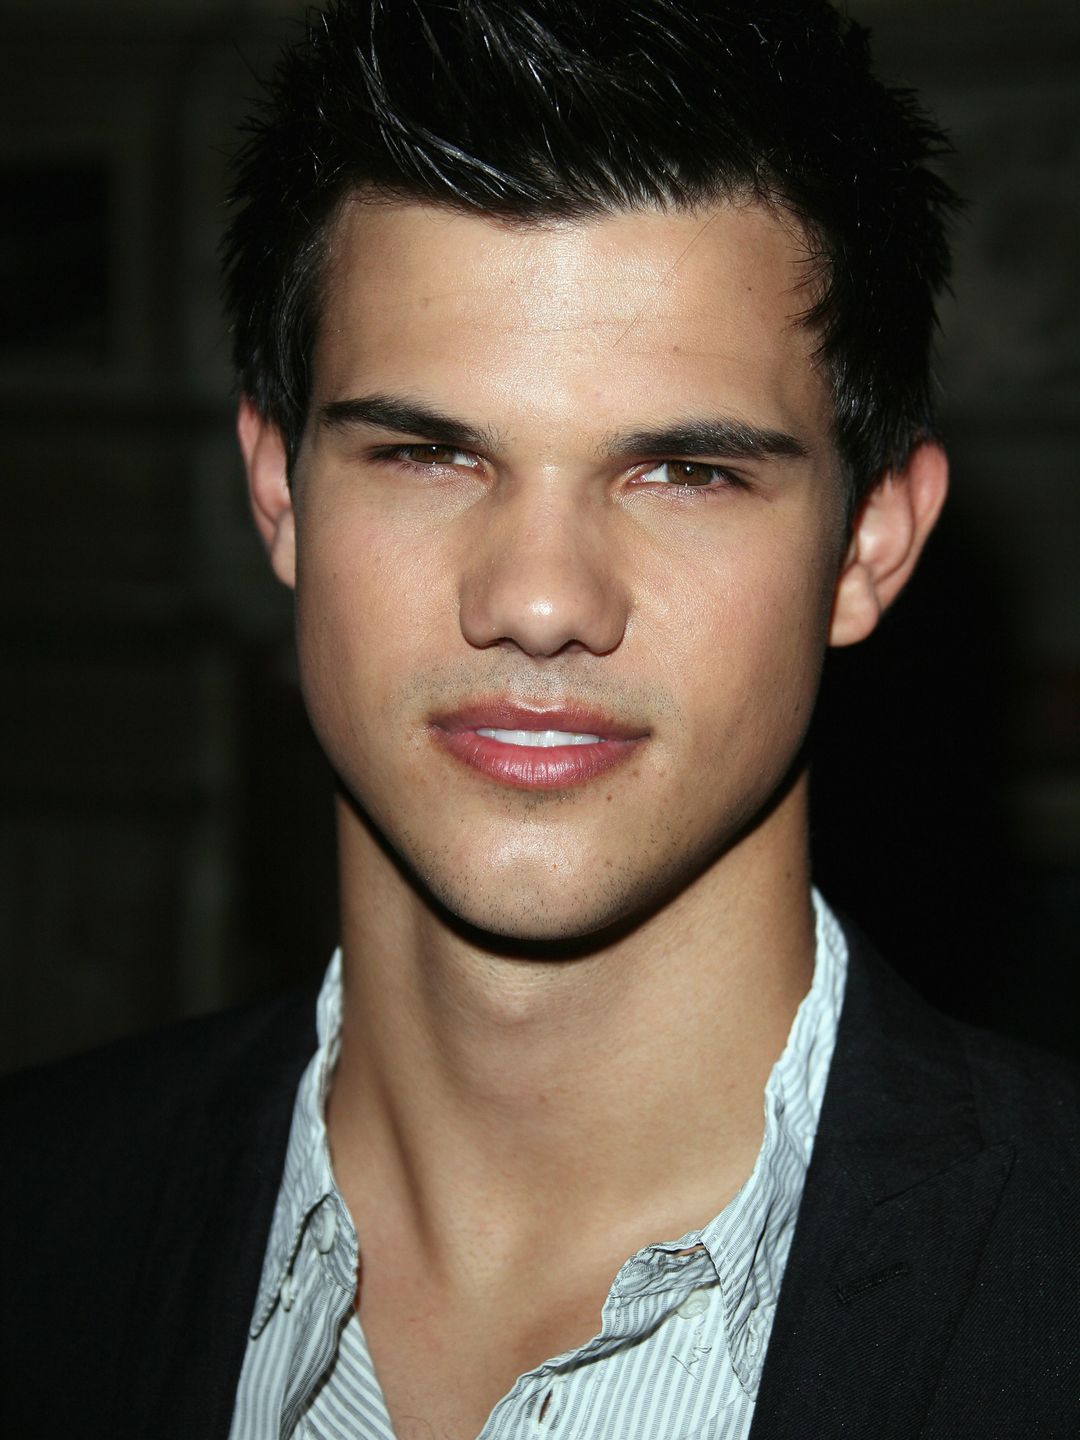 Taylor Lautner young photos